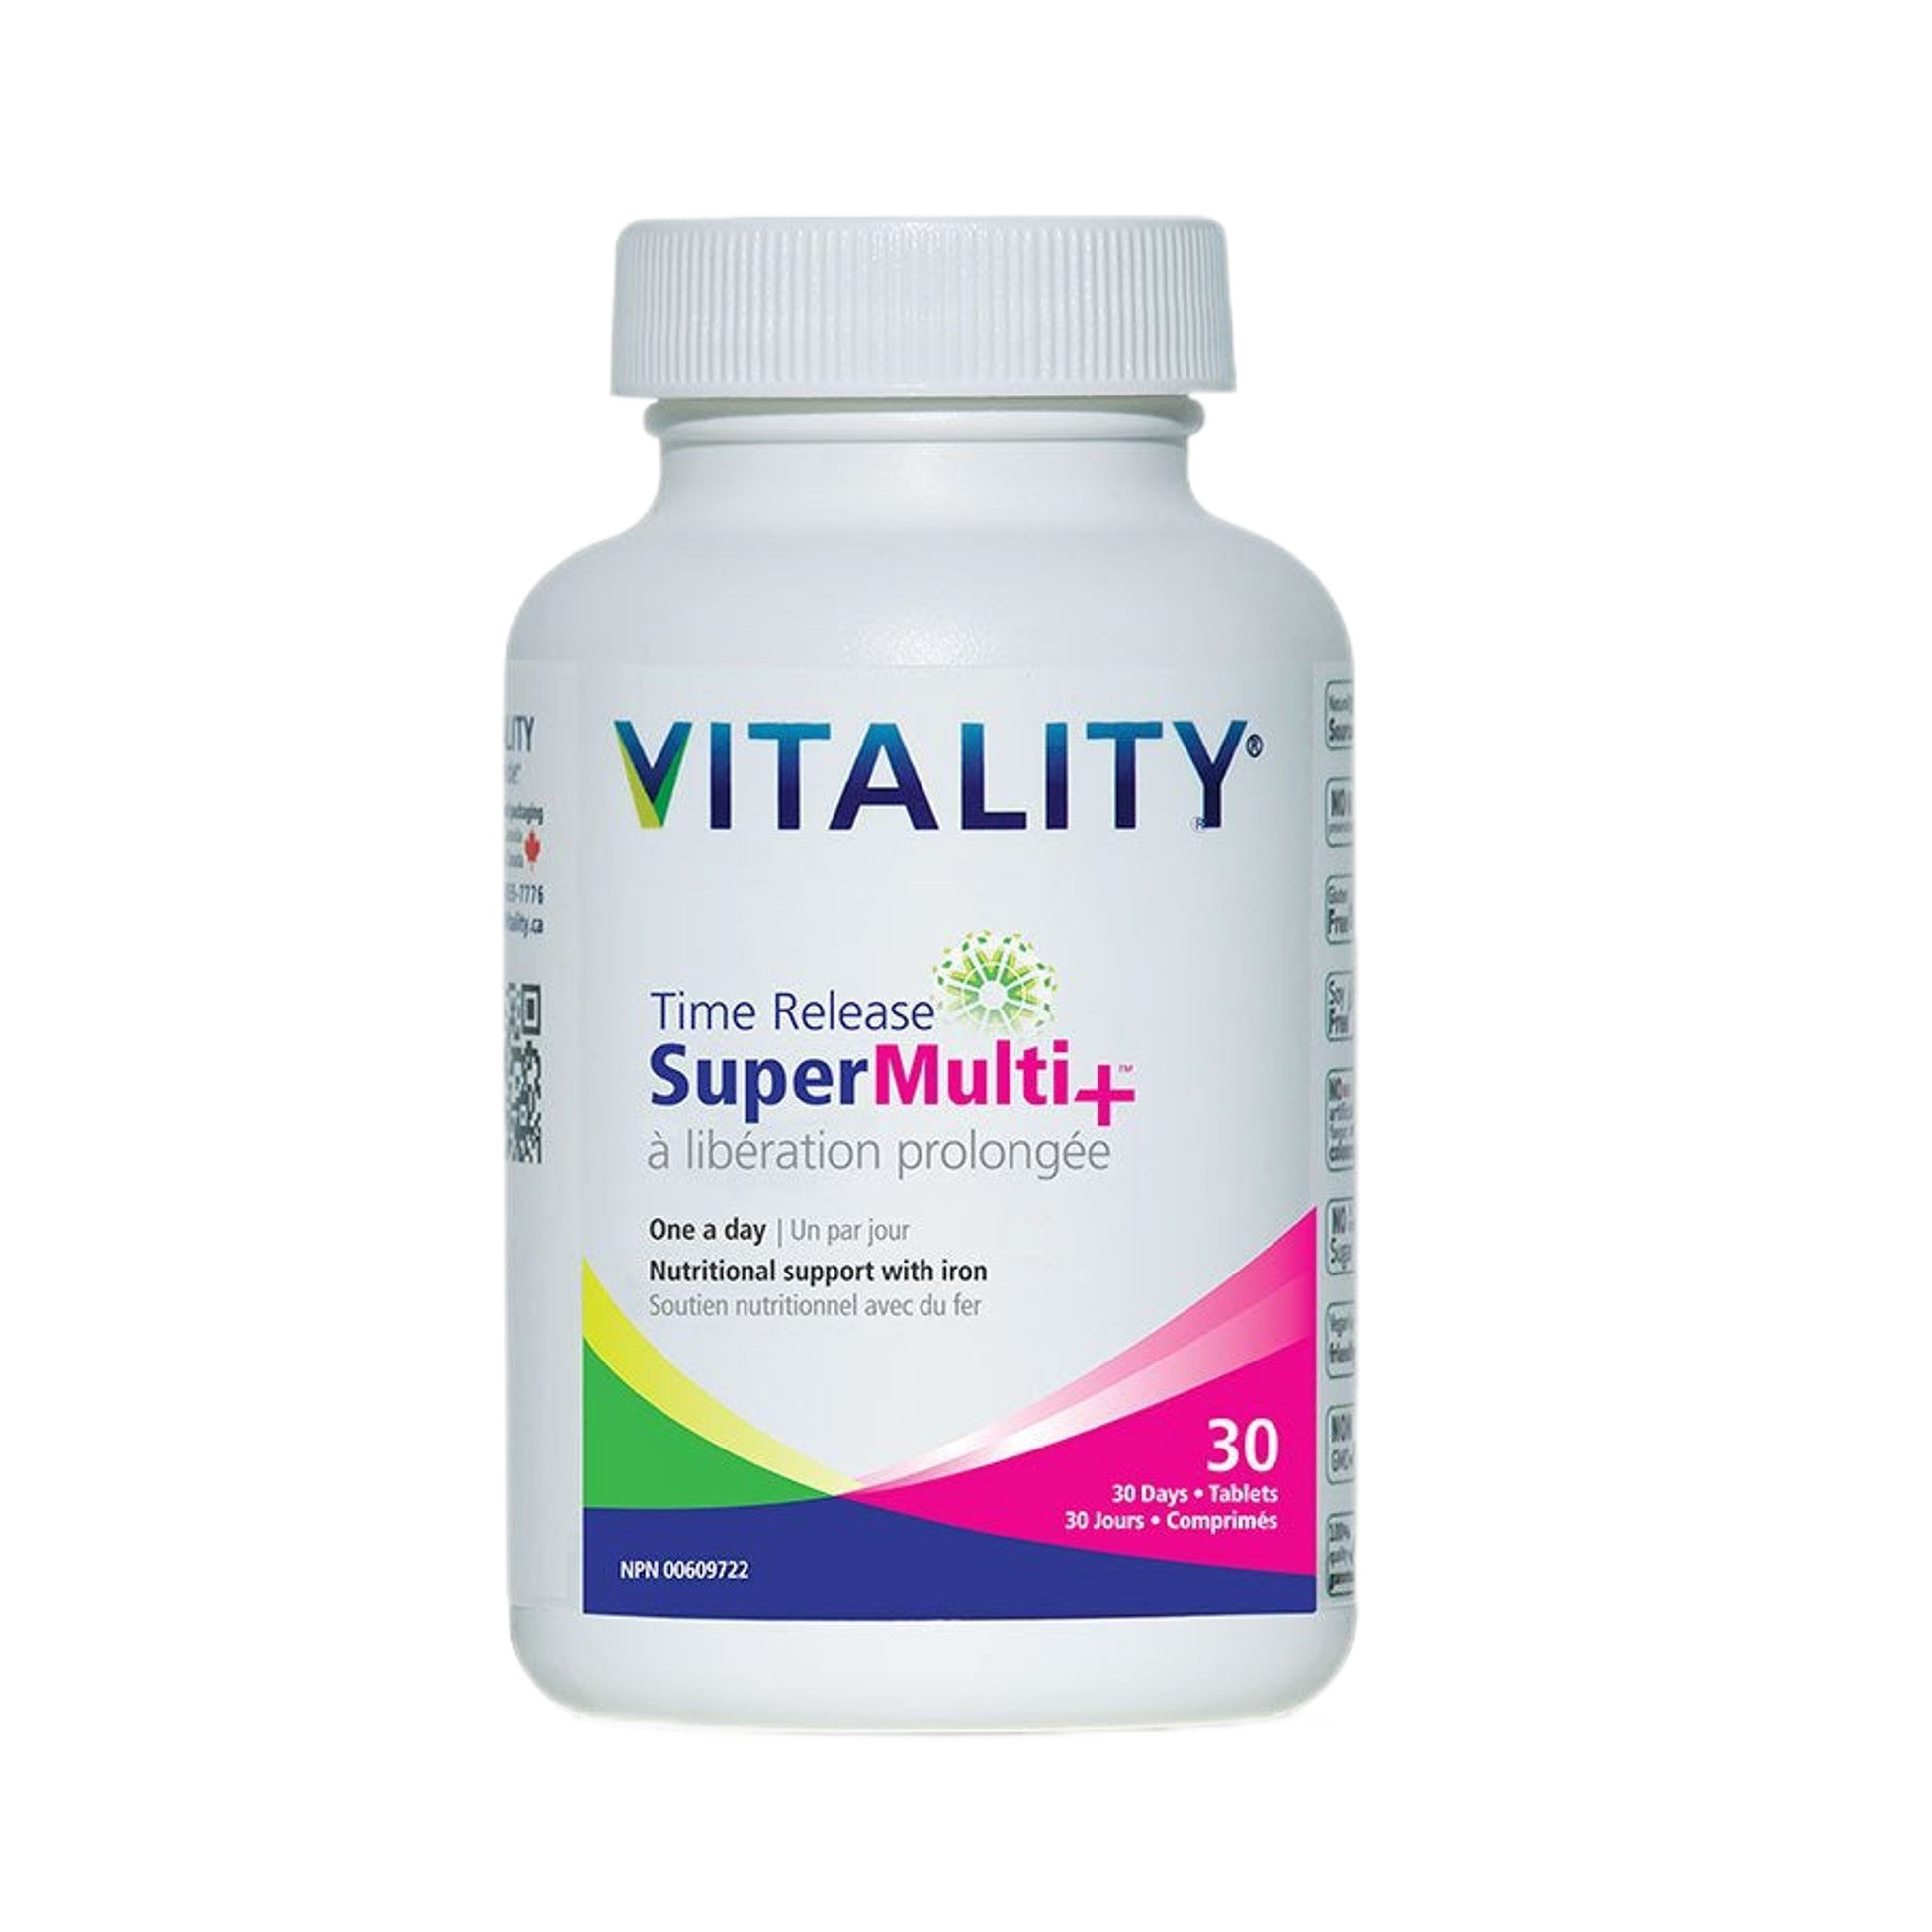 Vitality Time Release SuperMulti+ 30 Tablets